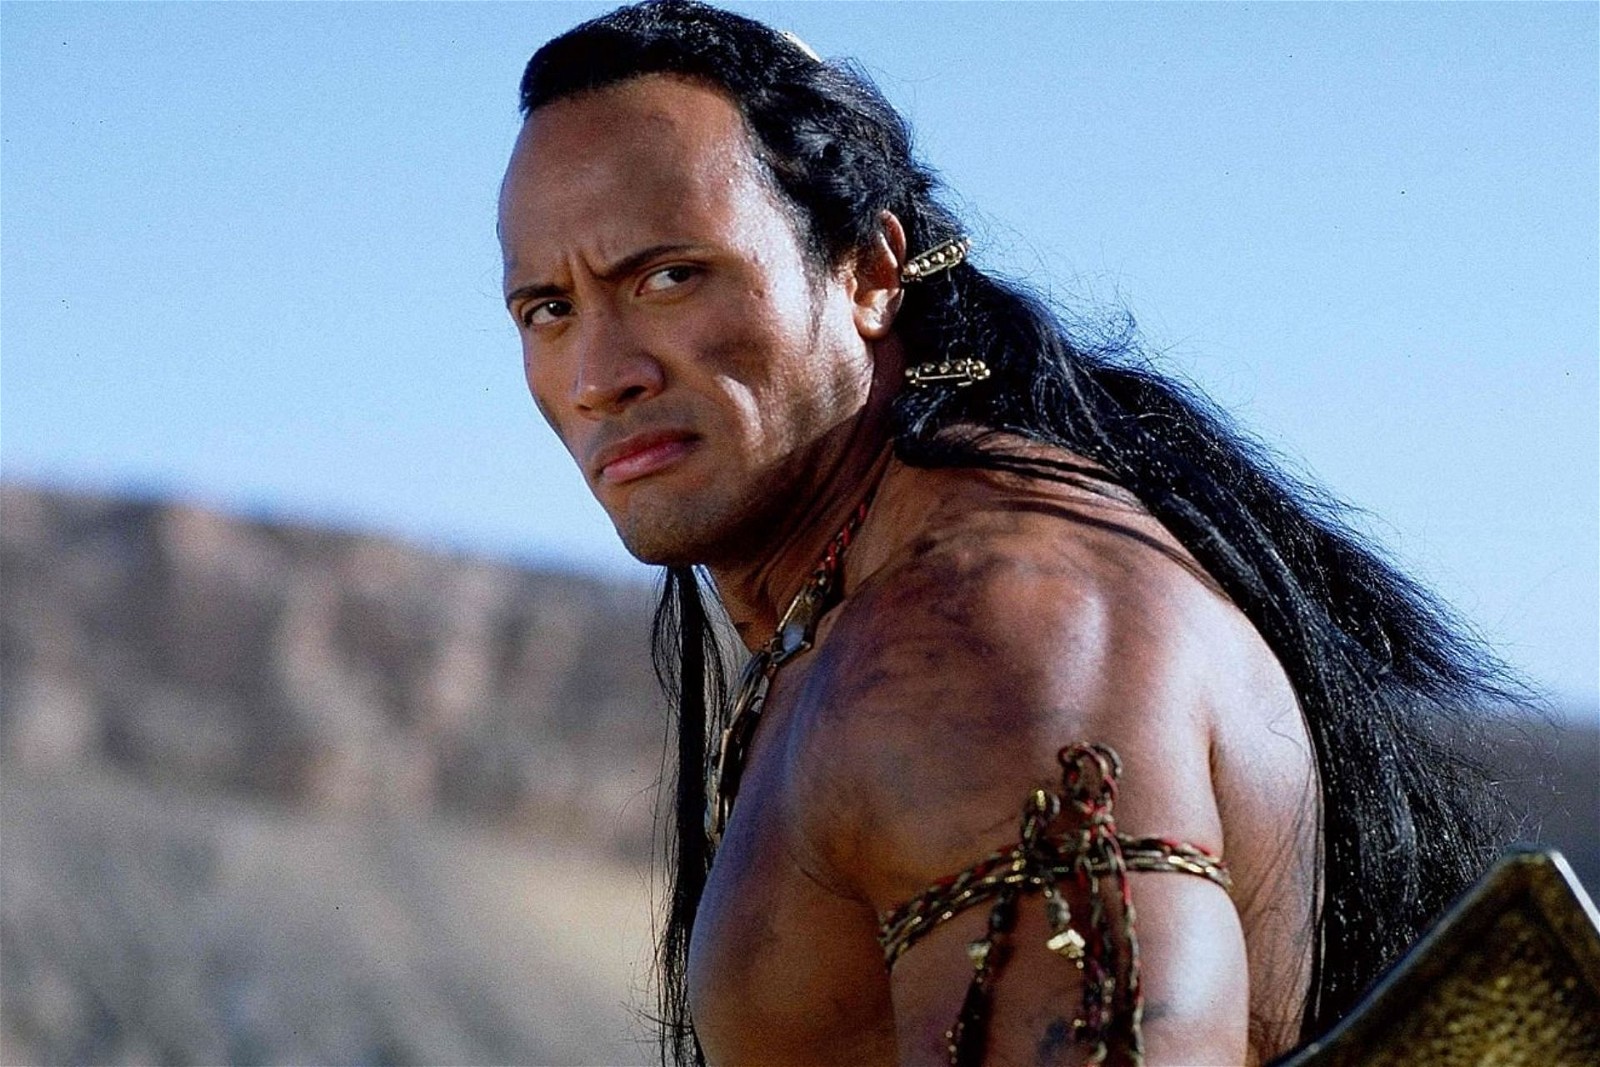 Dwayne Johnson in a scene from The Scorpion King